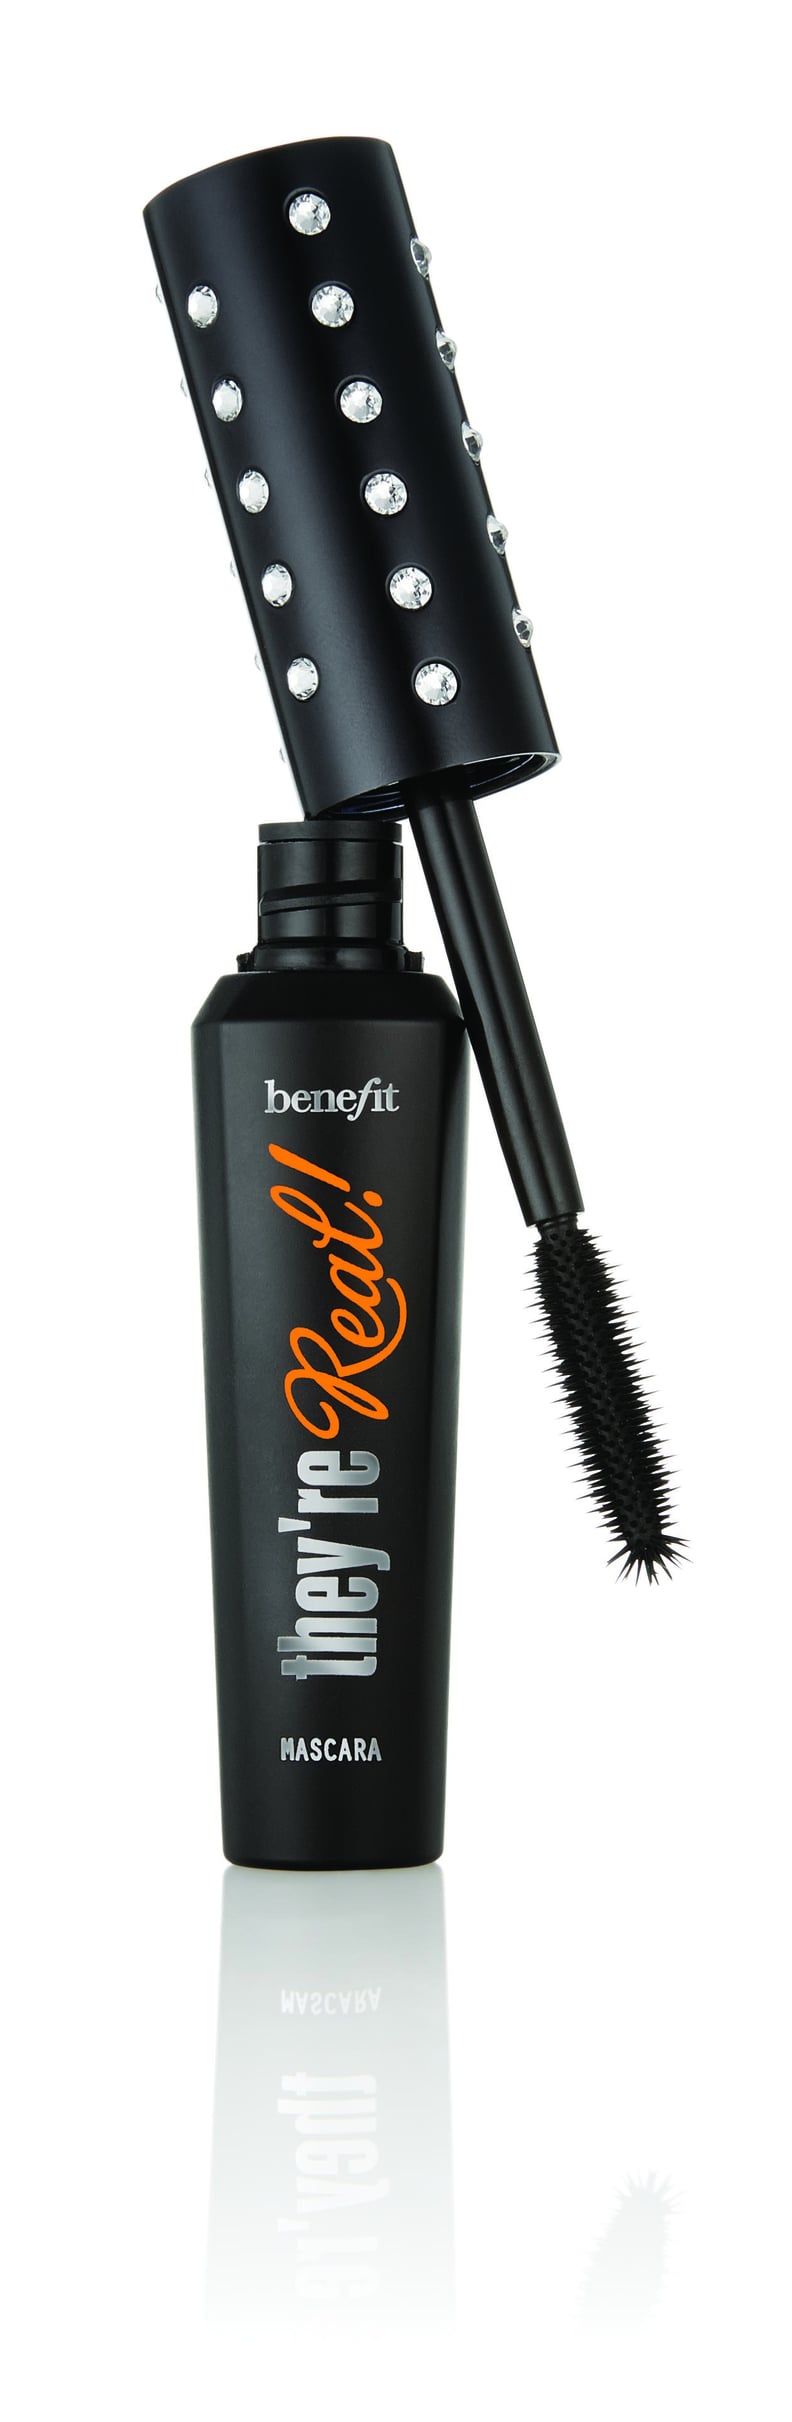 Benefit They're Real Limited Edition Mascara